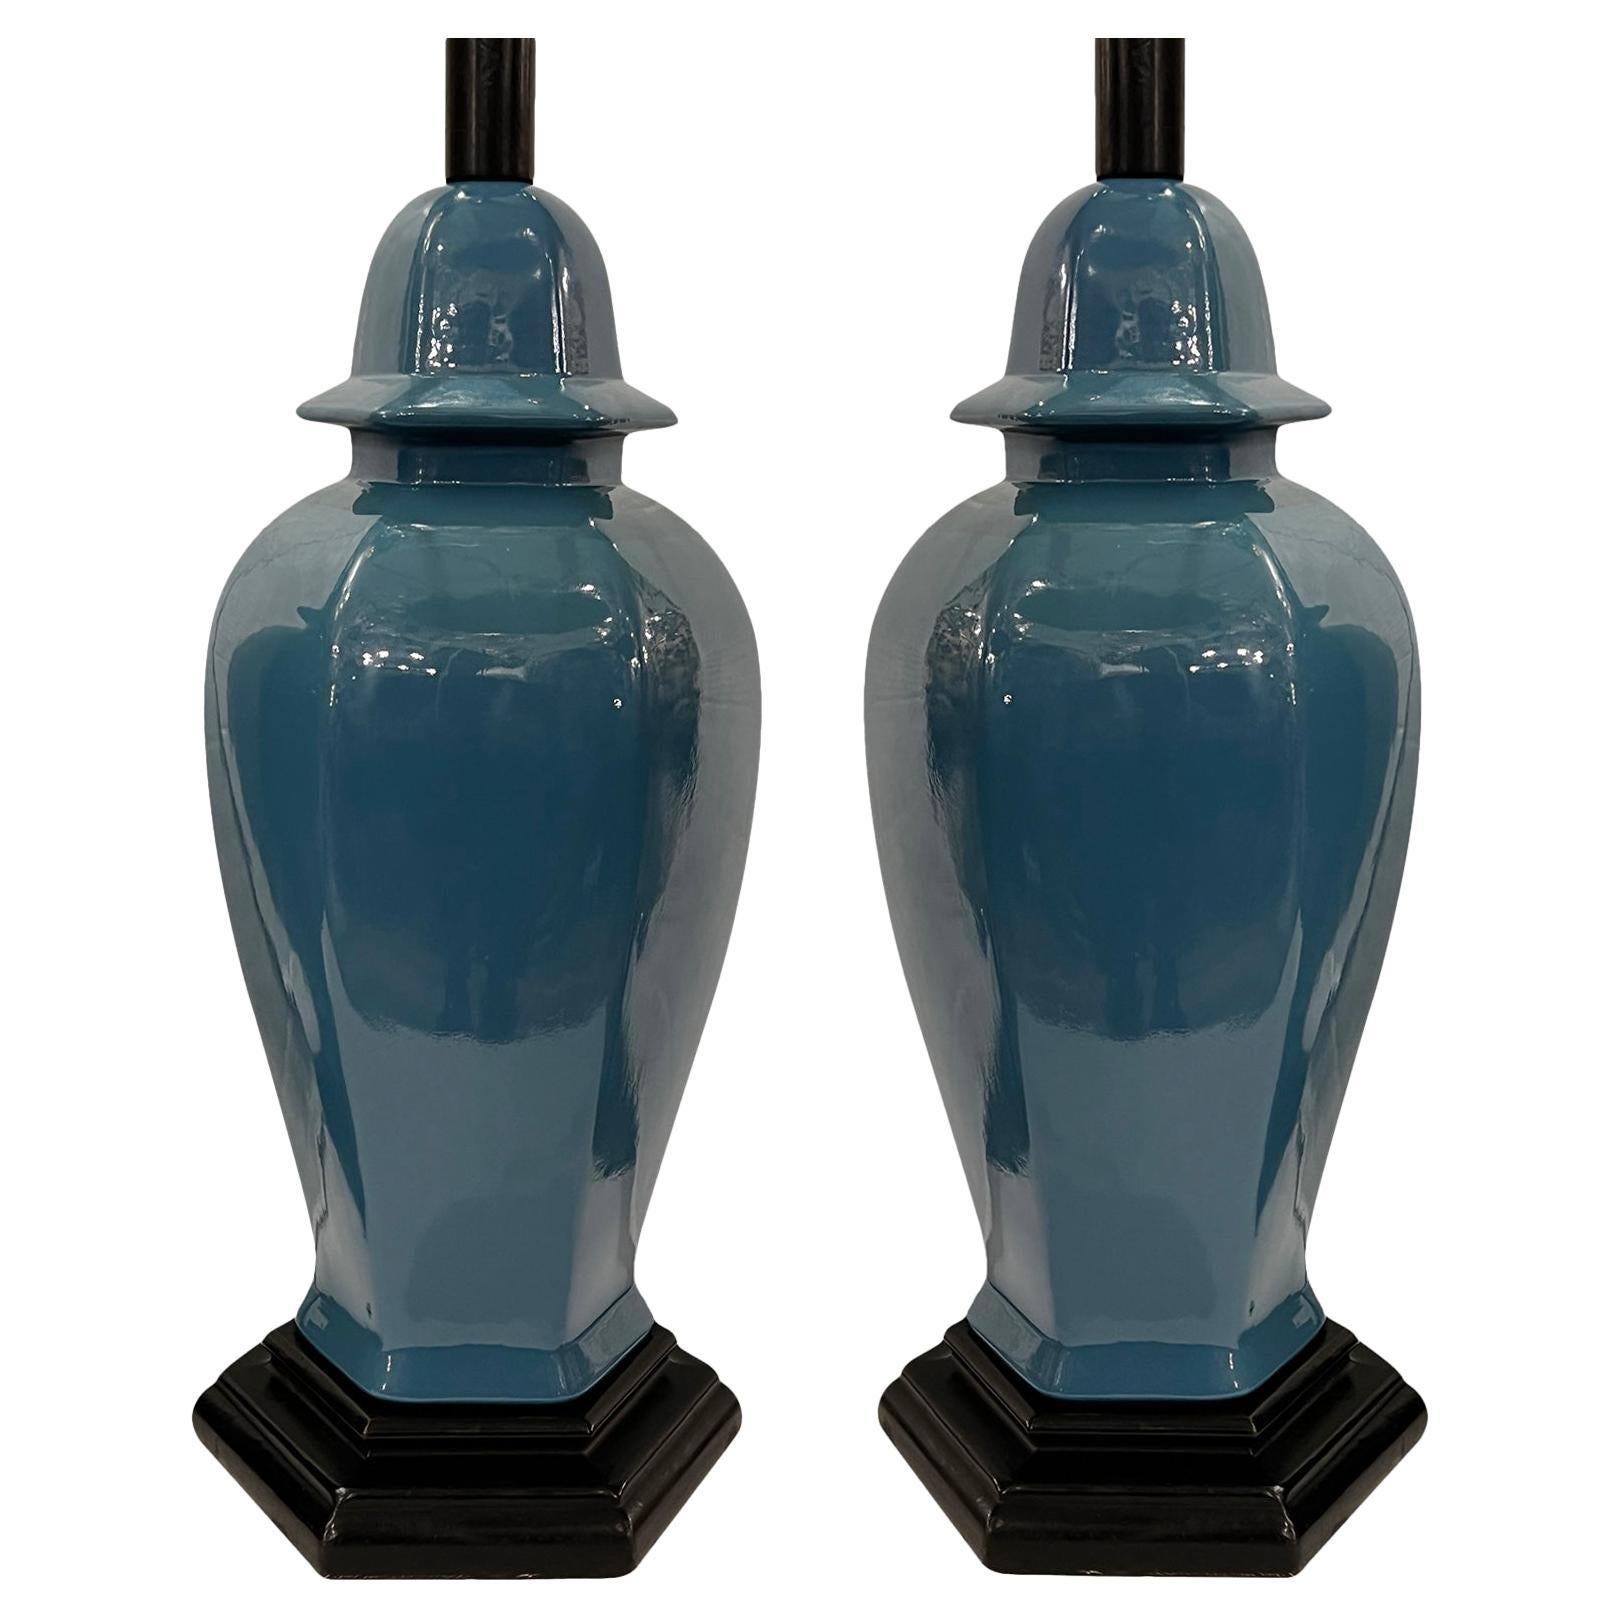 Pair of French Blue Porcelain Lamps